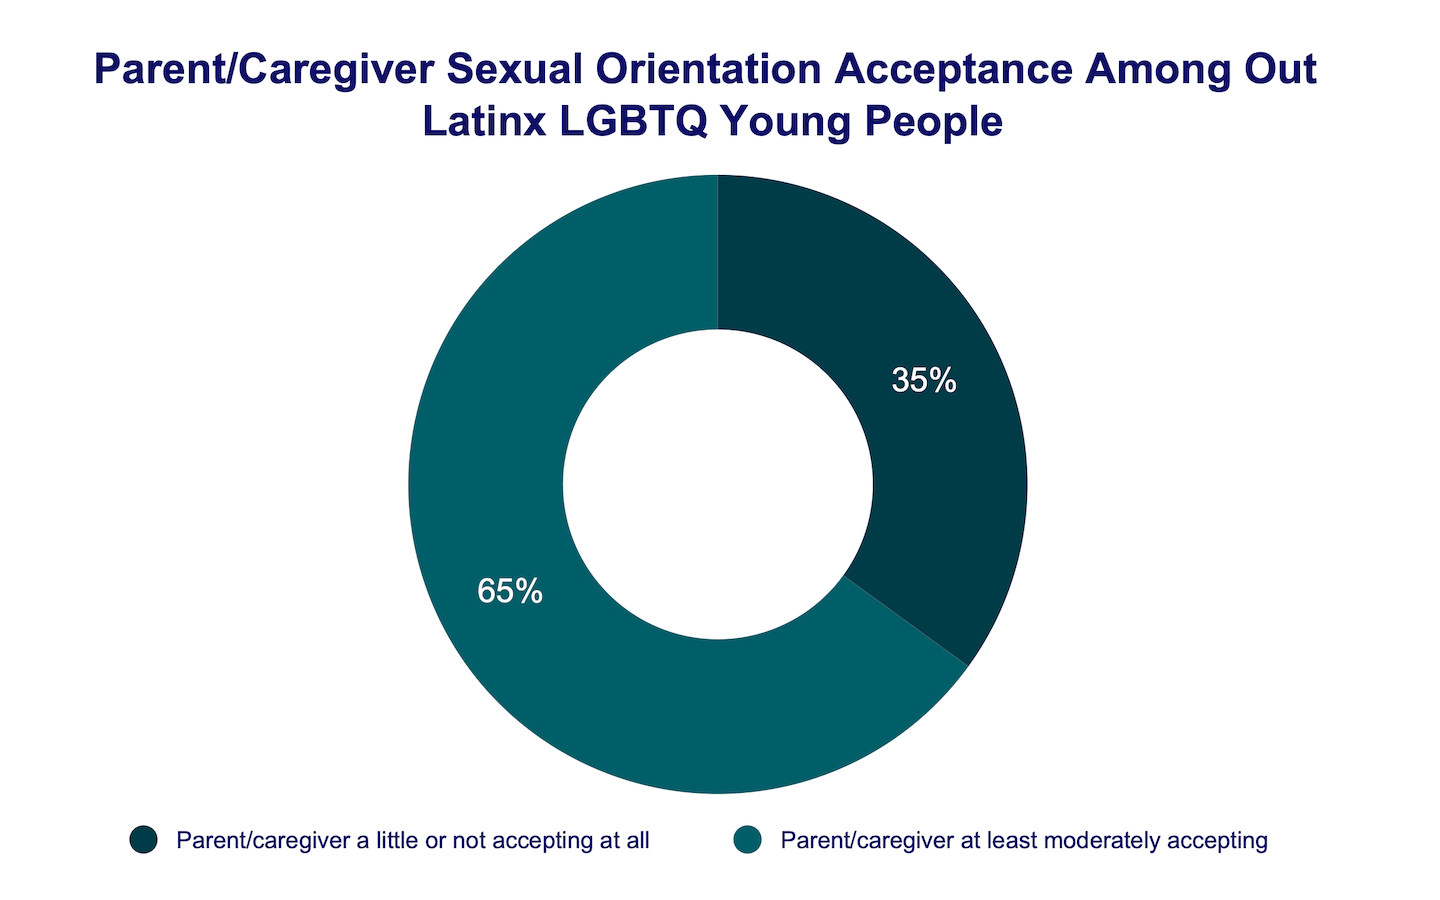 Parent/caregiver sexual orientation acceptance among out Latinx LGBTQ young people donut graph